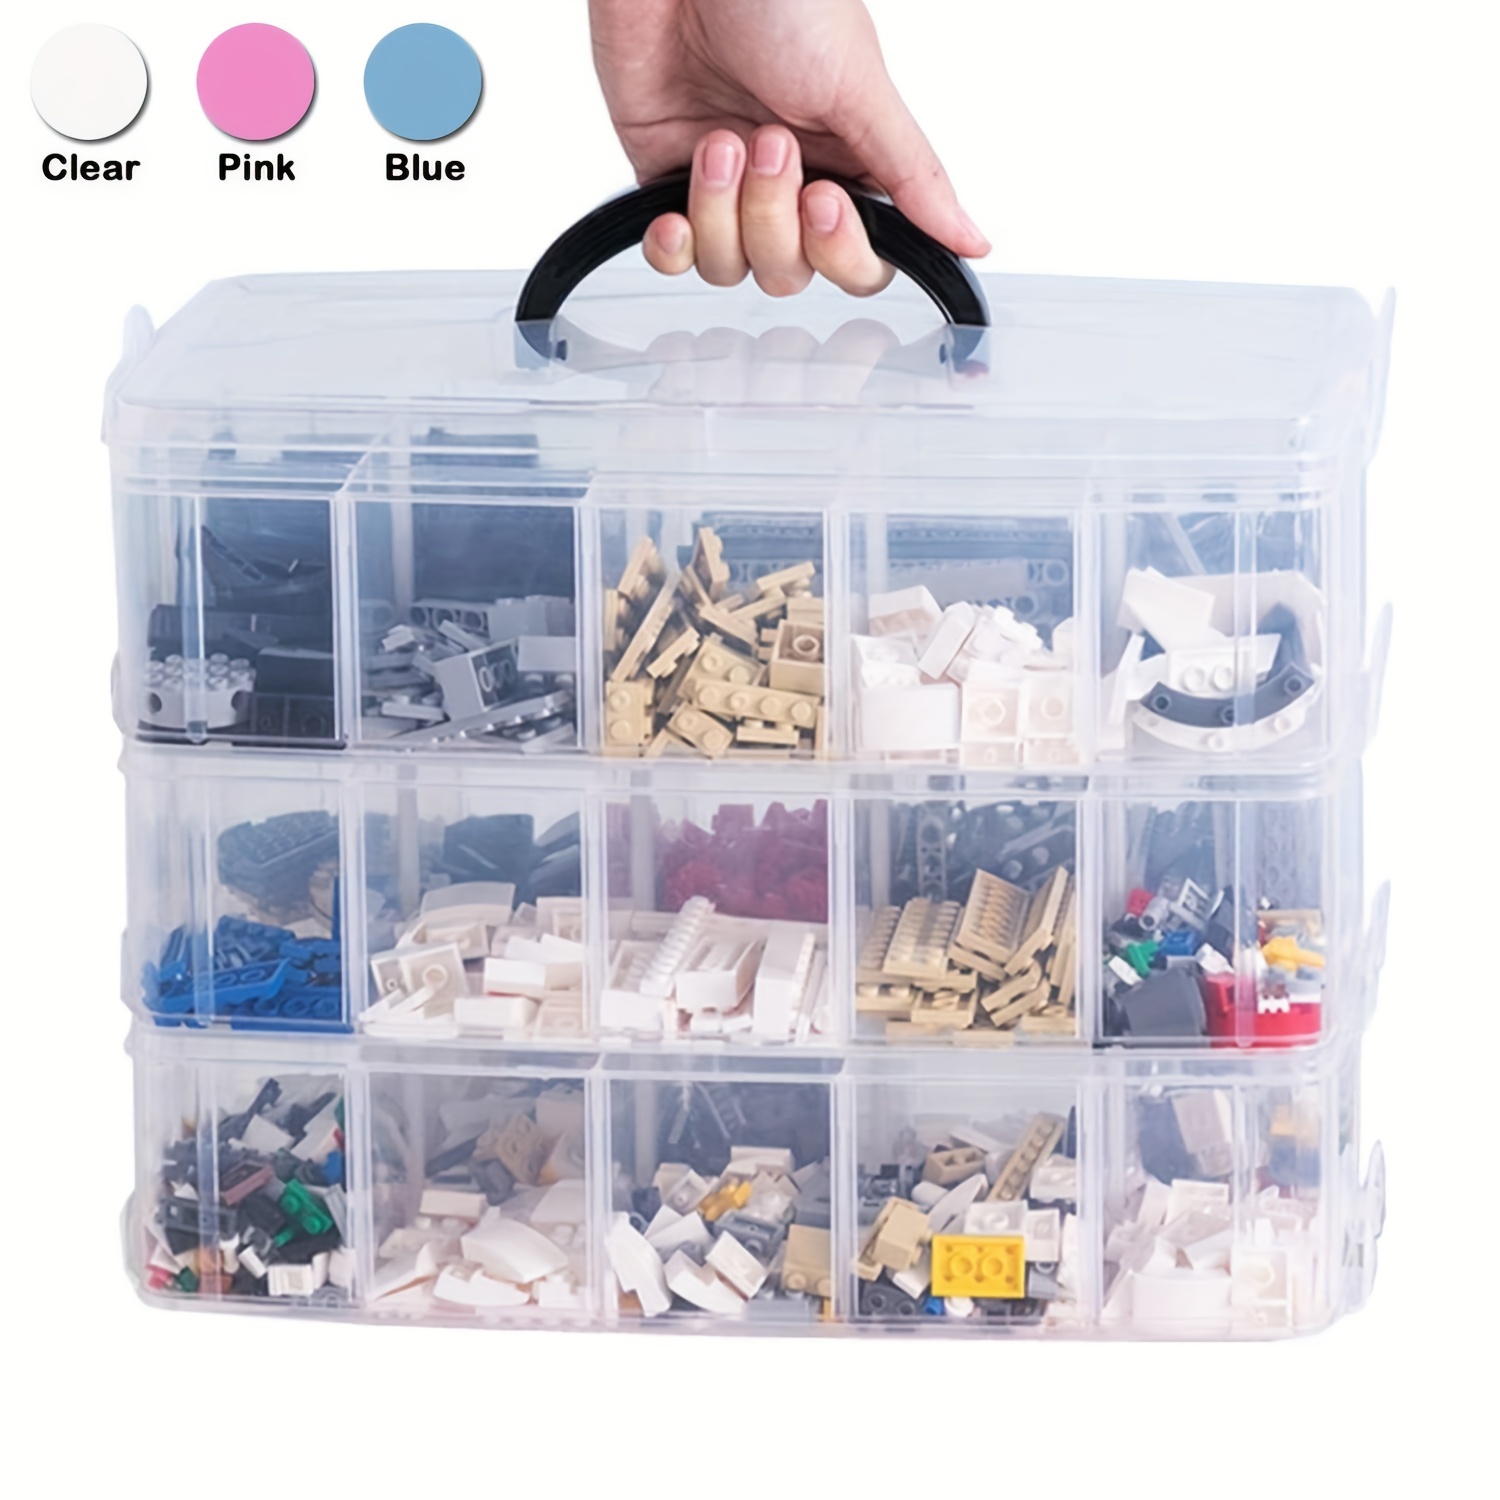 Bins & Things Toy Organizer With 18 Adjustable Compartments